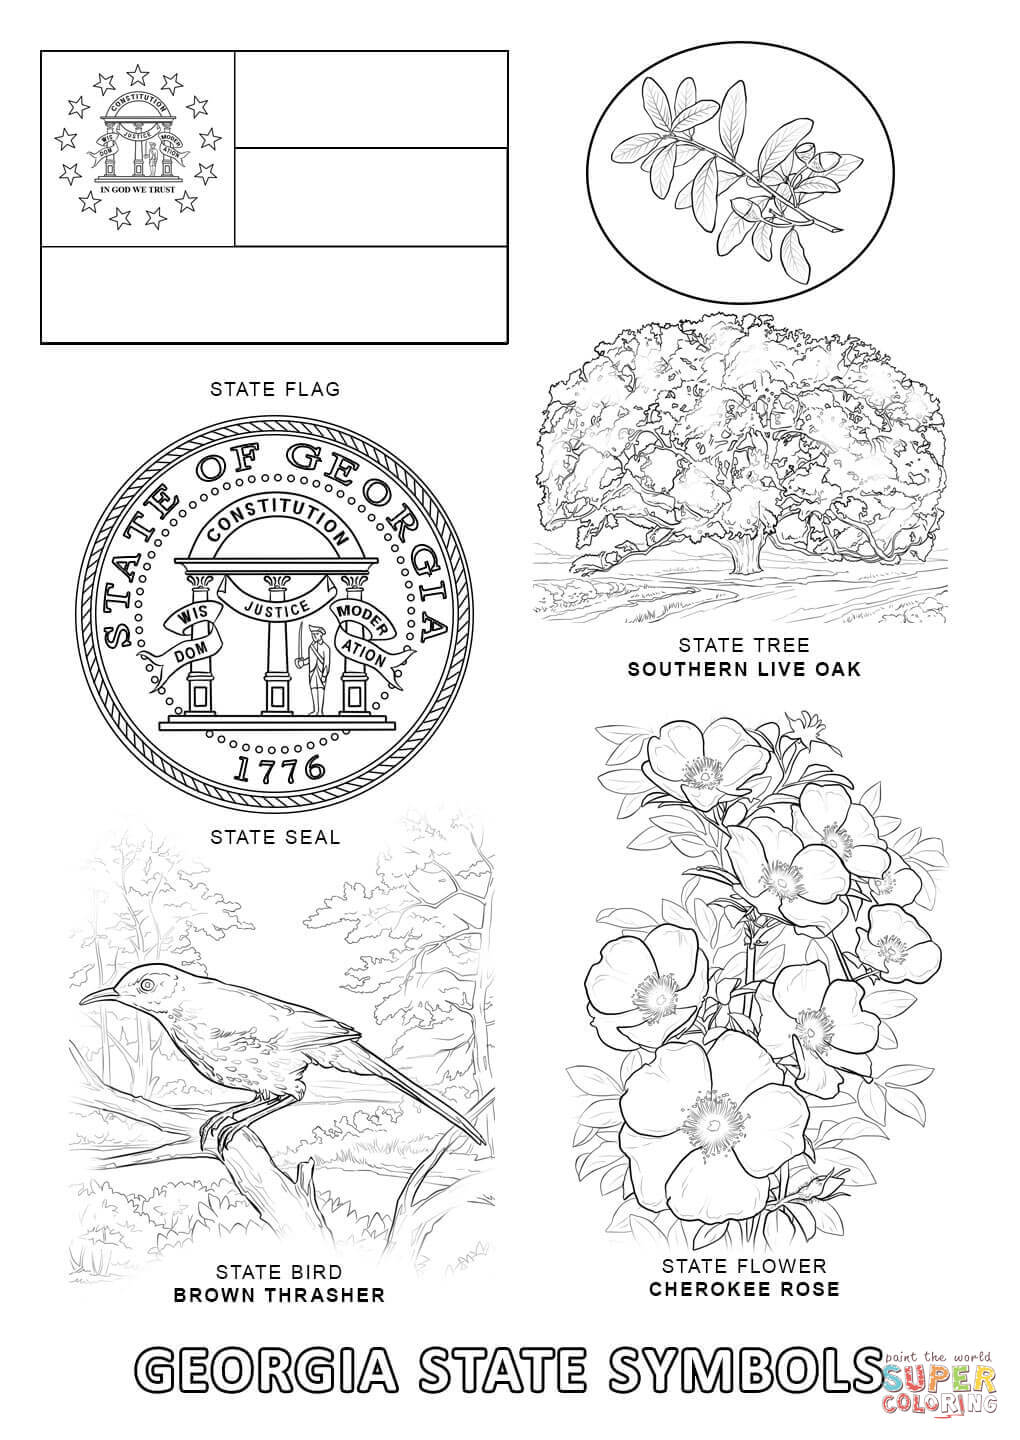 Georgia State Symbols coloring page | Free Printable Coloring Pages